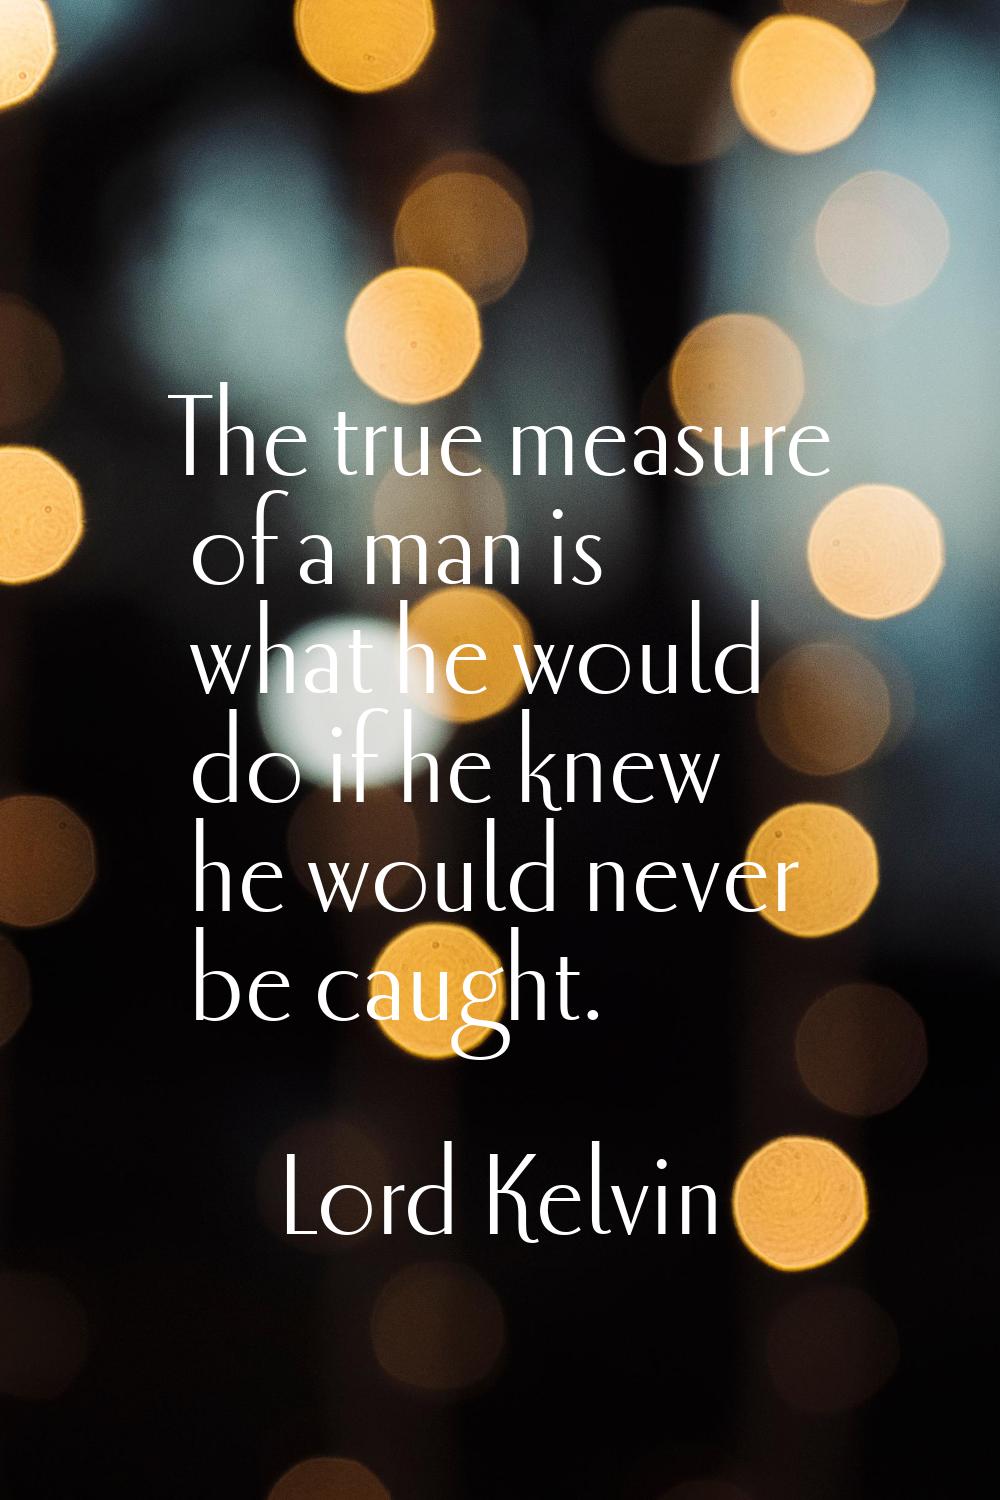 The true measure of a man is what he would do if he knew he would never be caught.